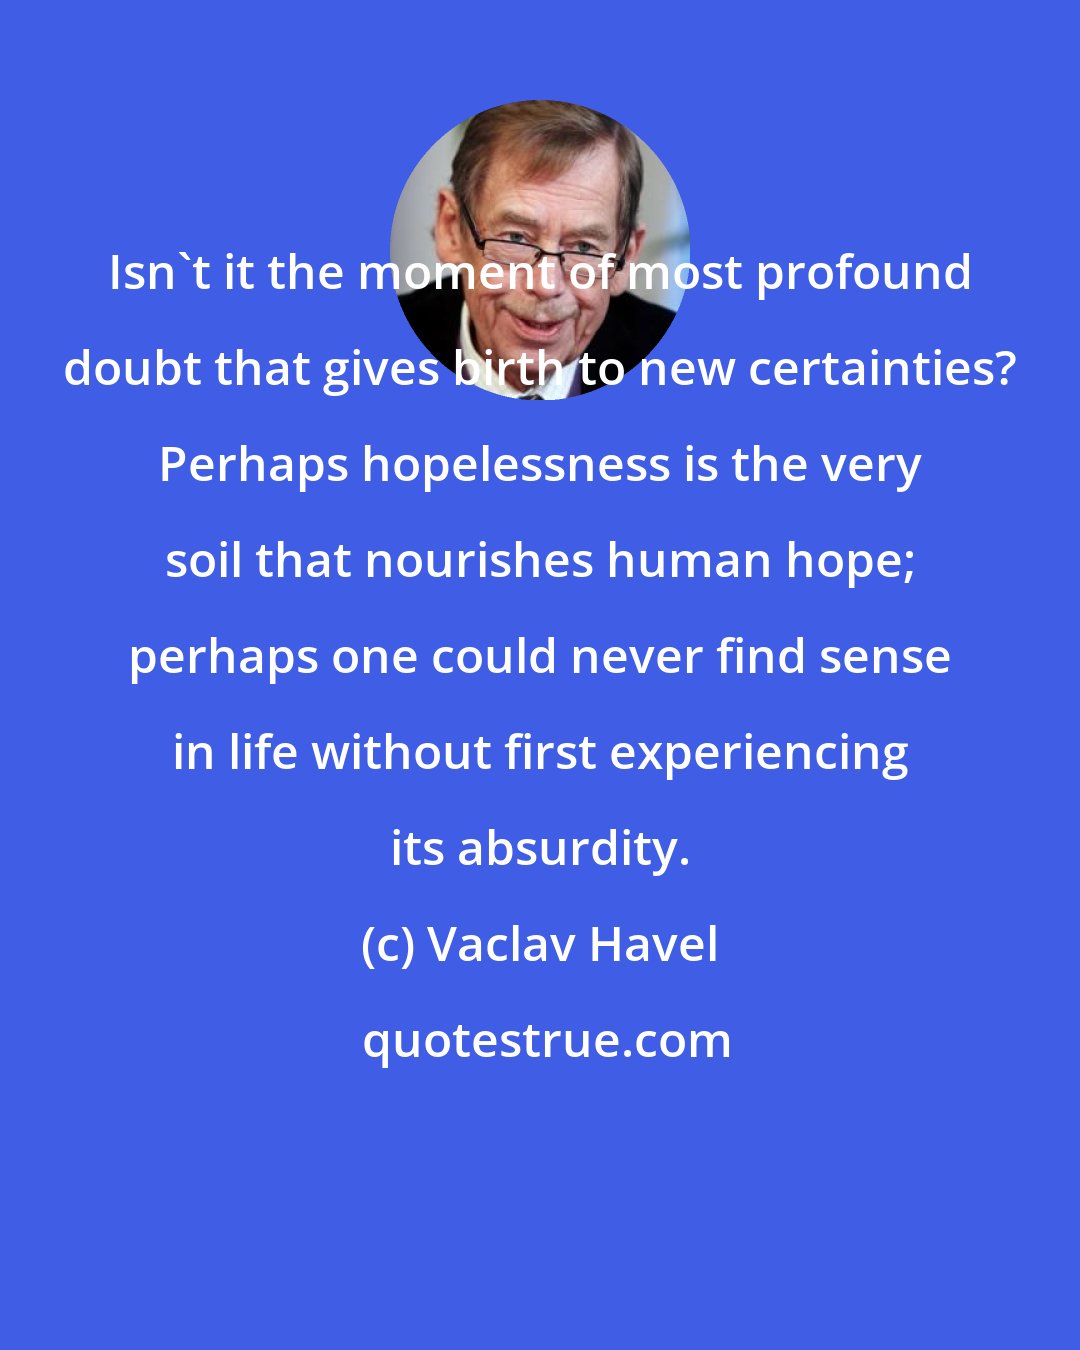 Vaclav Havel: Isn't it the moment of most profound doubt that gives birth to new certainties? Perhaps hopelessness is the very soil that nourishes human hope; perhaps one could never find sense in life without first experiencing its absurdity.